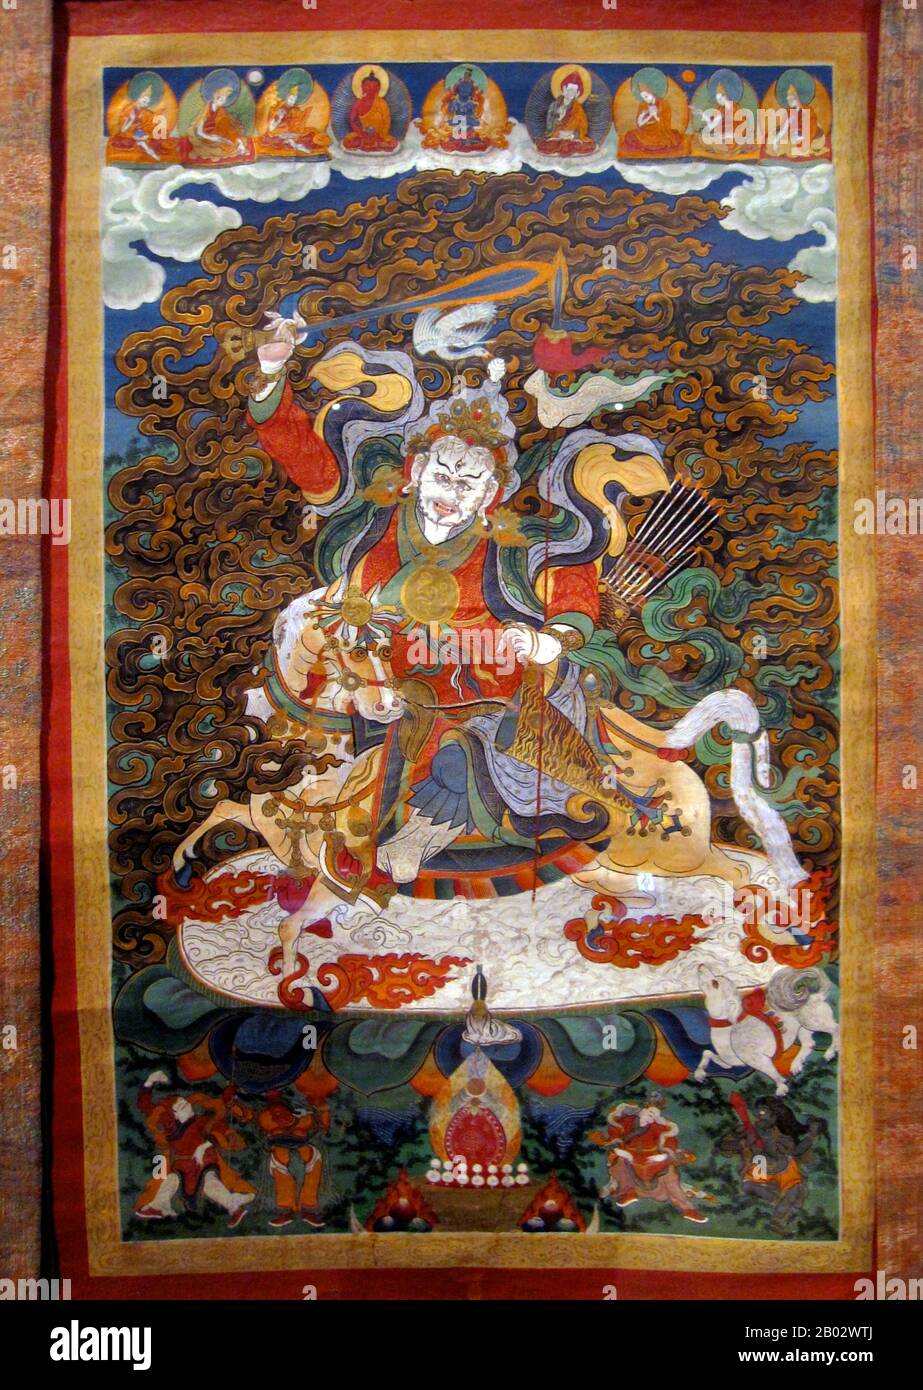 Mongolian Buddhism: Buddhist Thangka portraying a mountain deity wielding a sword. A 'thangka', also transliterated as 'tangka', 'thanka' or 'tanka' , is a Tibetan or Mongolian silk painting with embroidery, usually depicting a Buddhist deity, famous scene, or mandala. Stock Photo